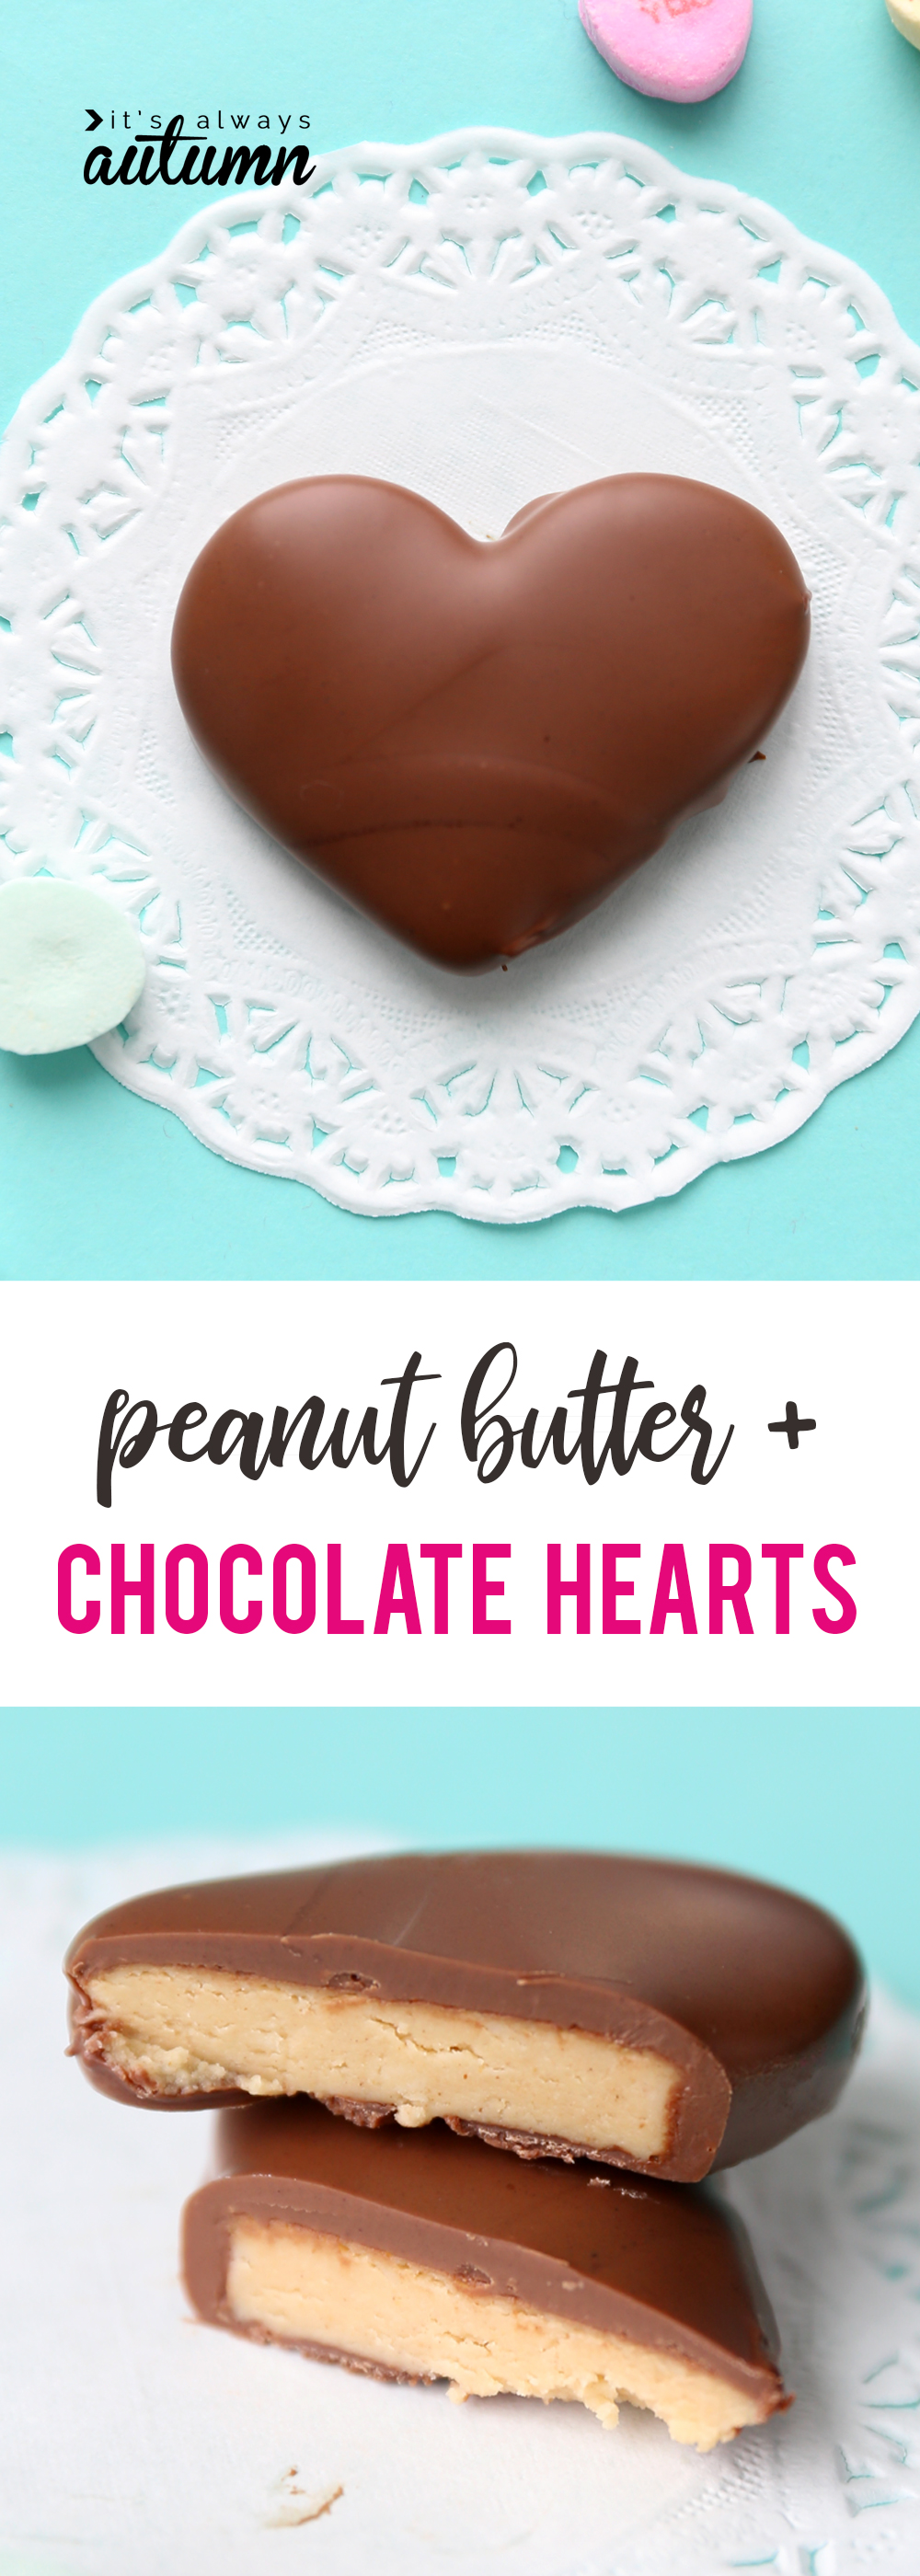 Peanut butter hearts covered in chocolate